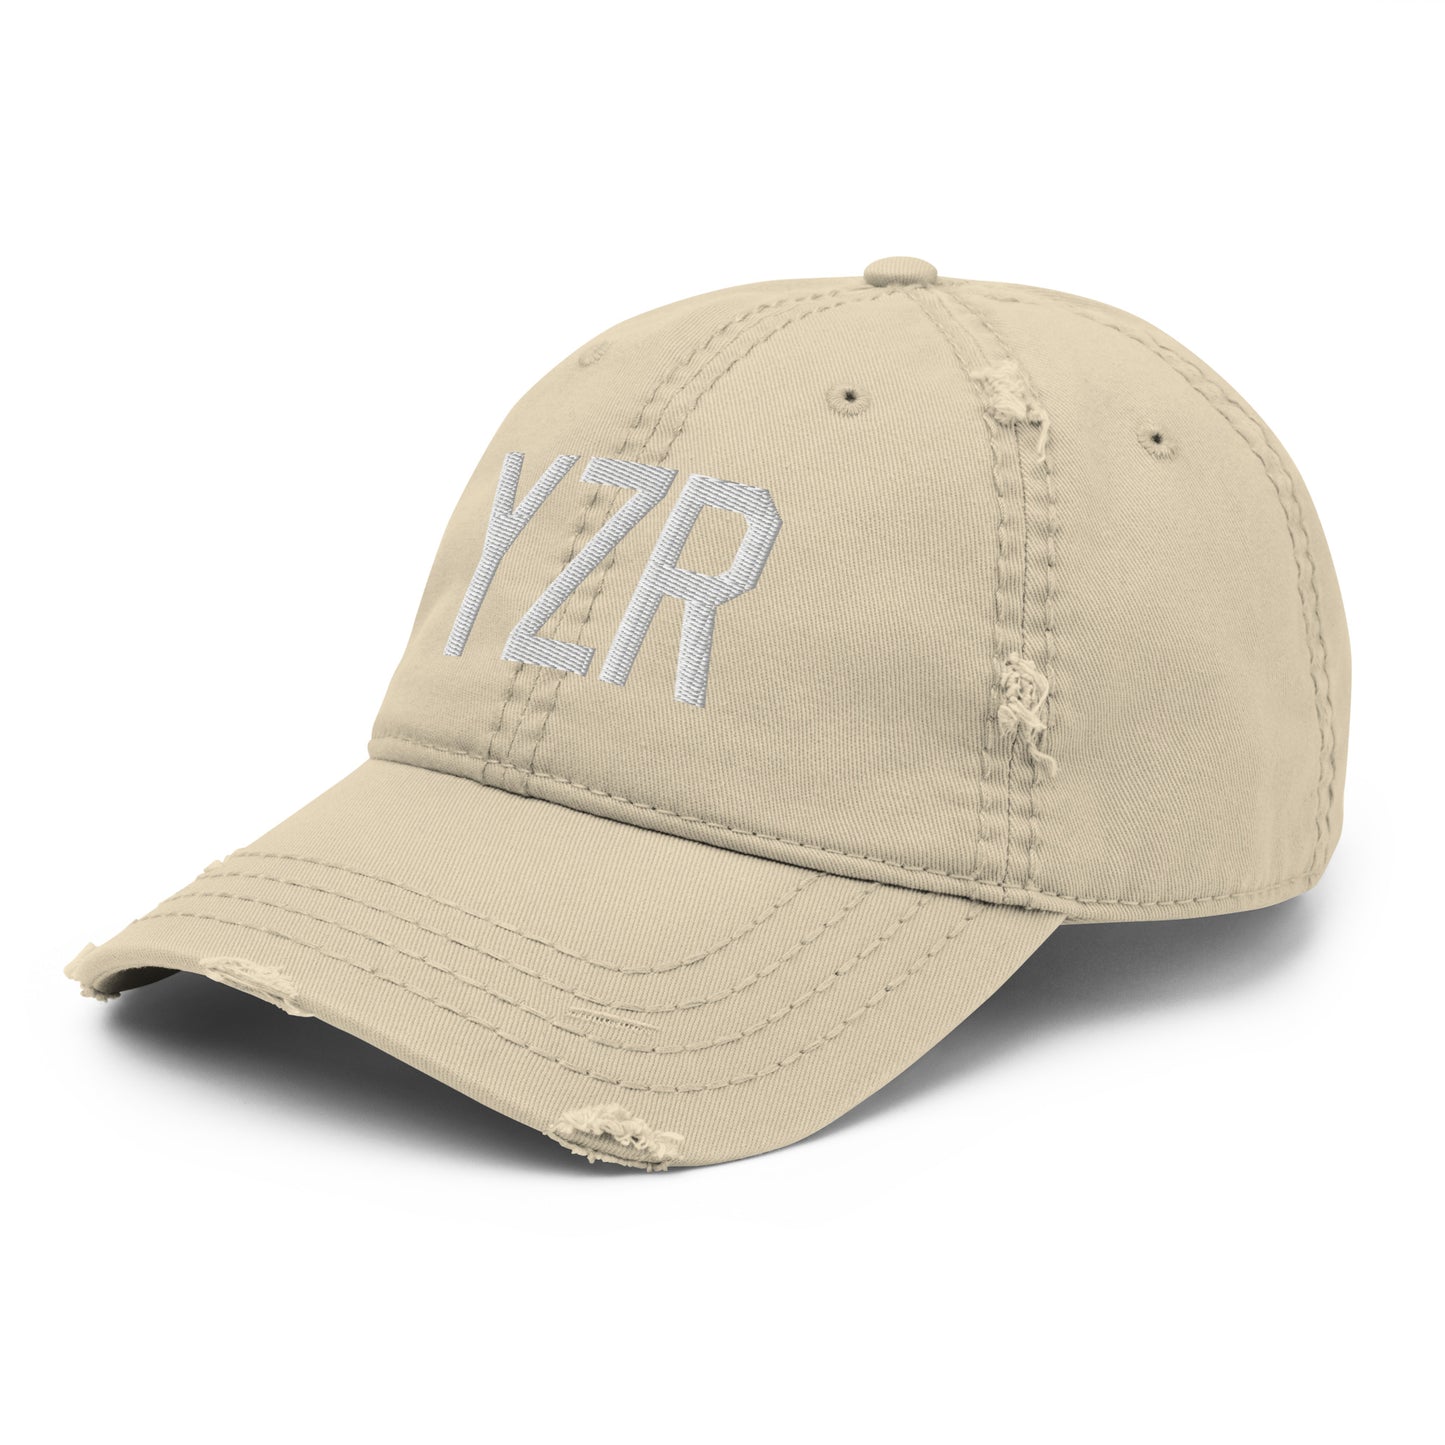 Airport Code Distressed Hat - White • YZR Sarnia • YHM Designs - Image 19